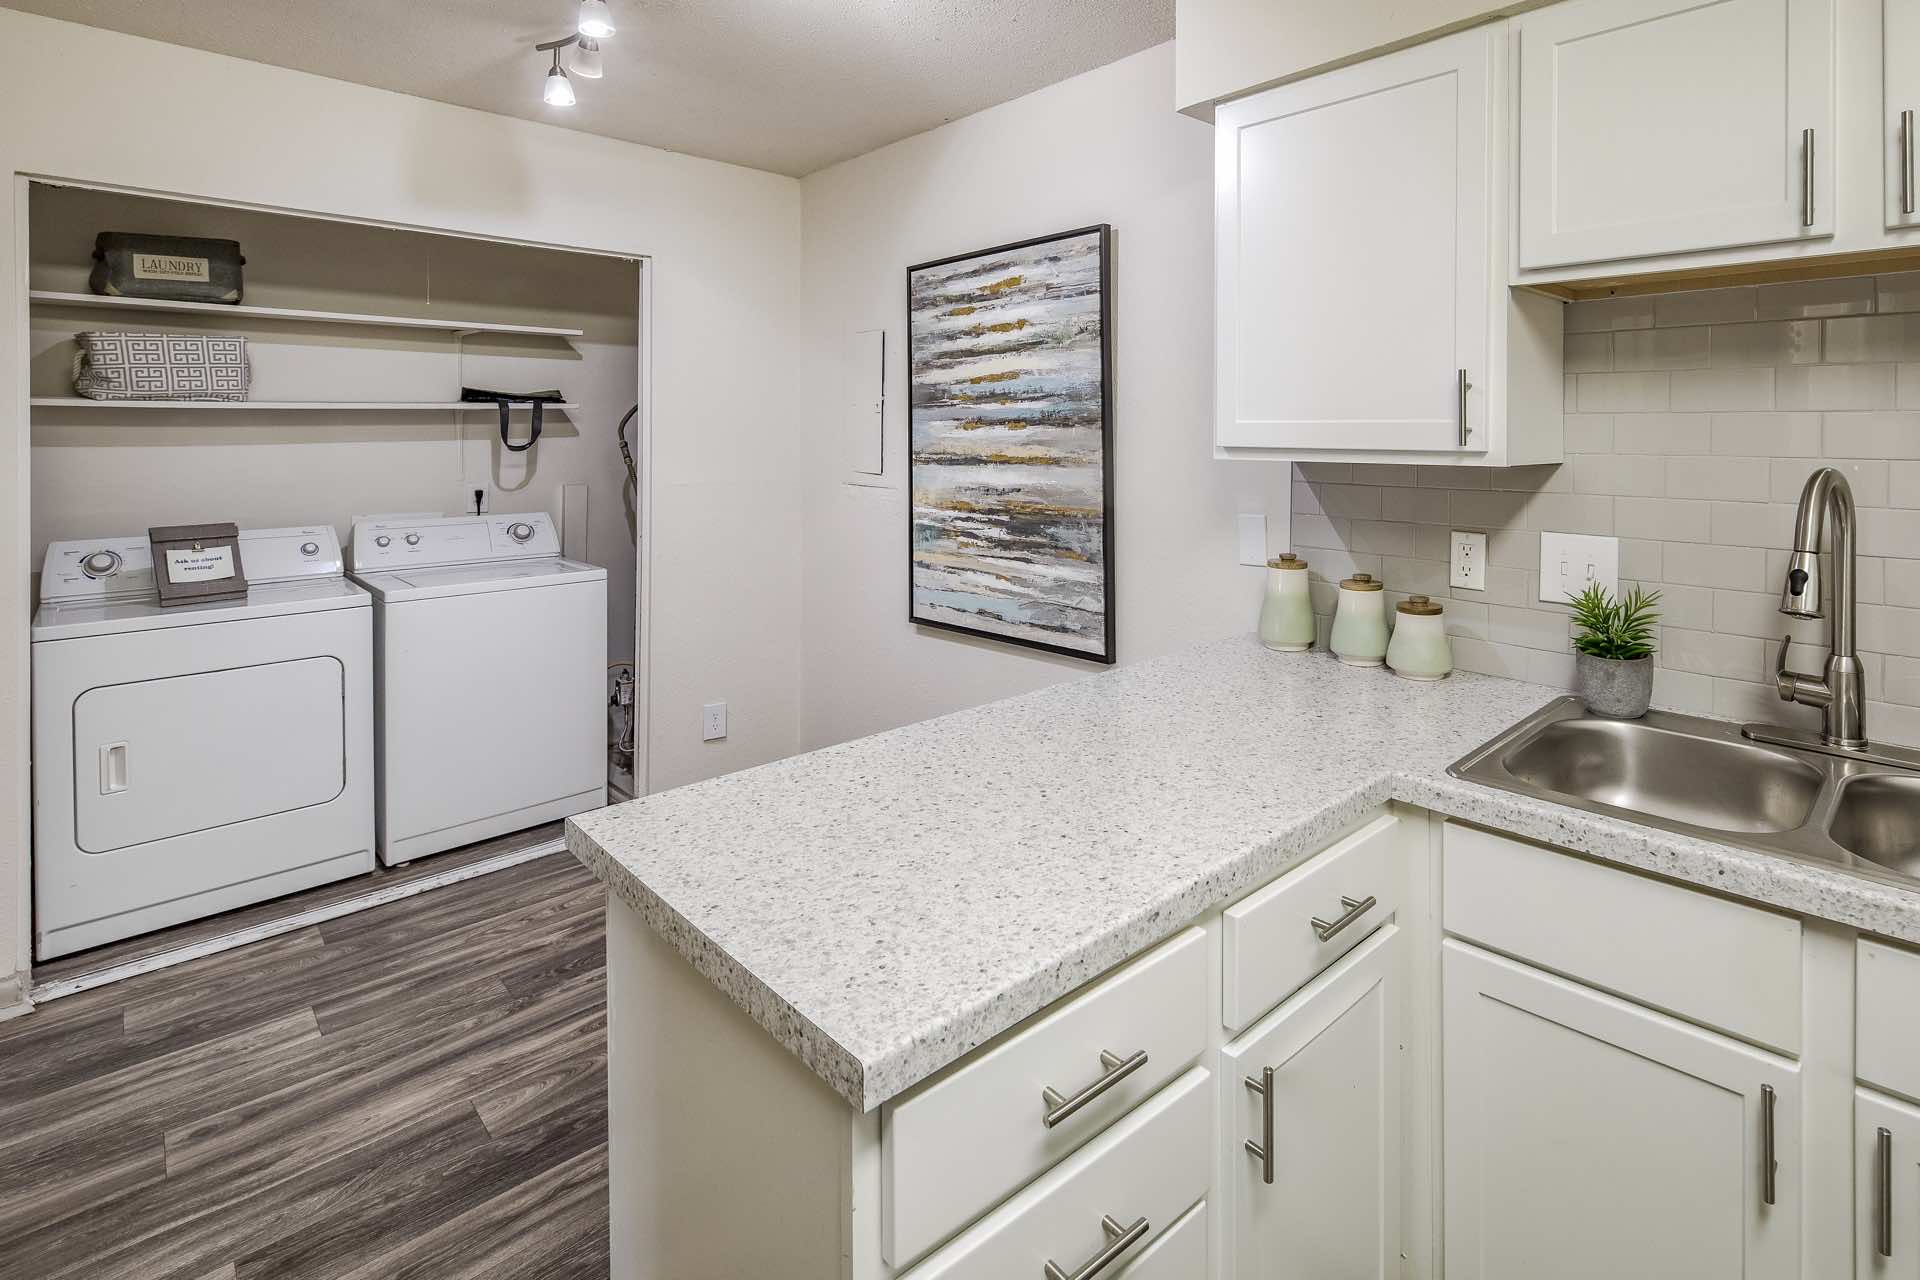 kitchen opens to laundry room with full-size washer and dryer